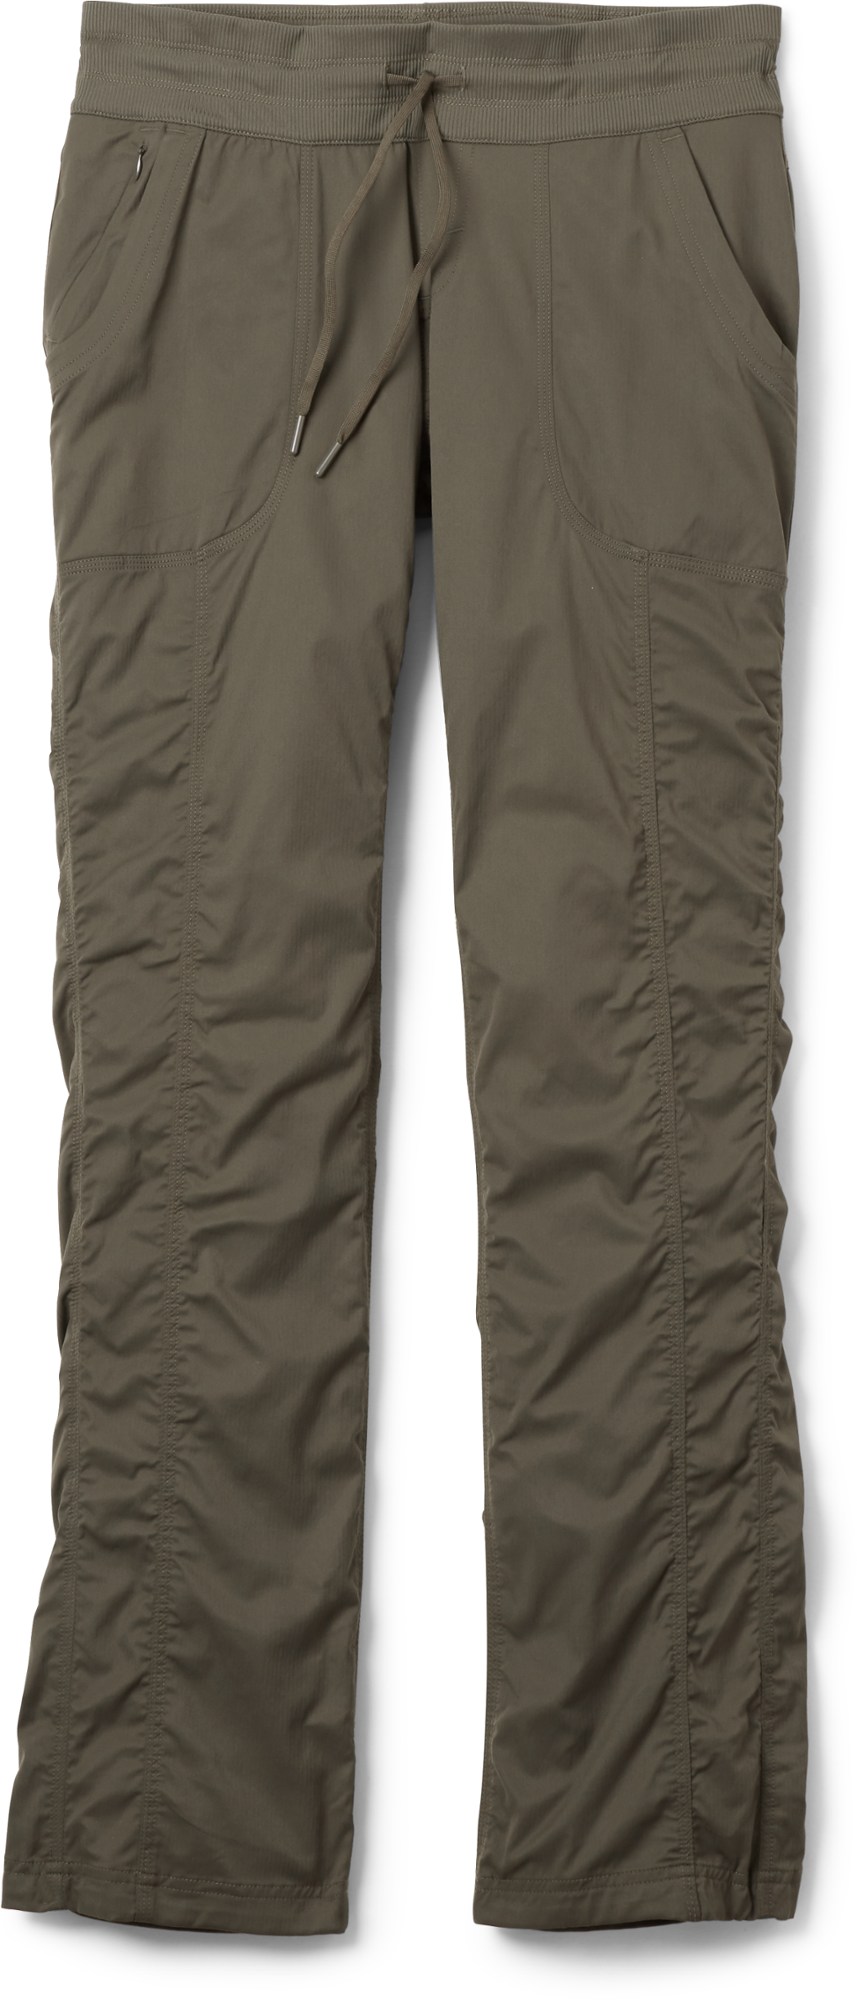 The North Face Aphrodite 2.0 pants